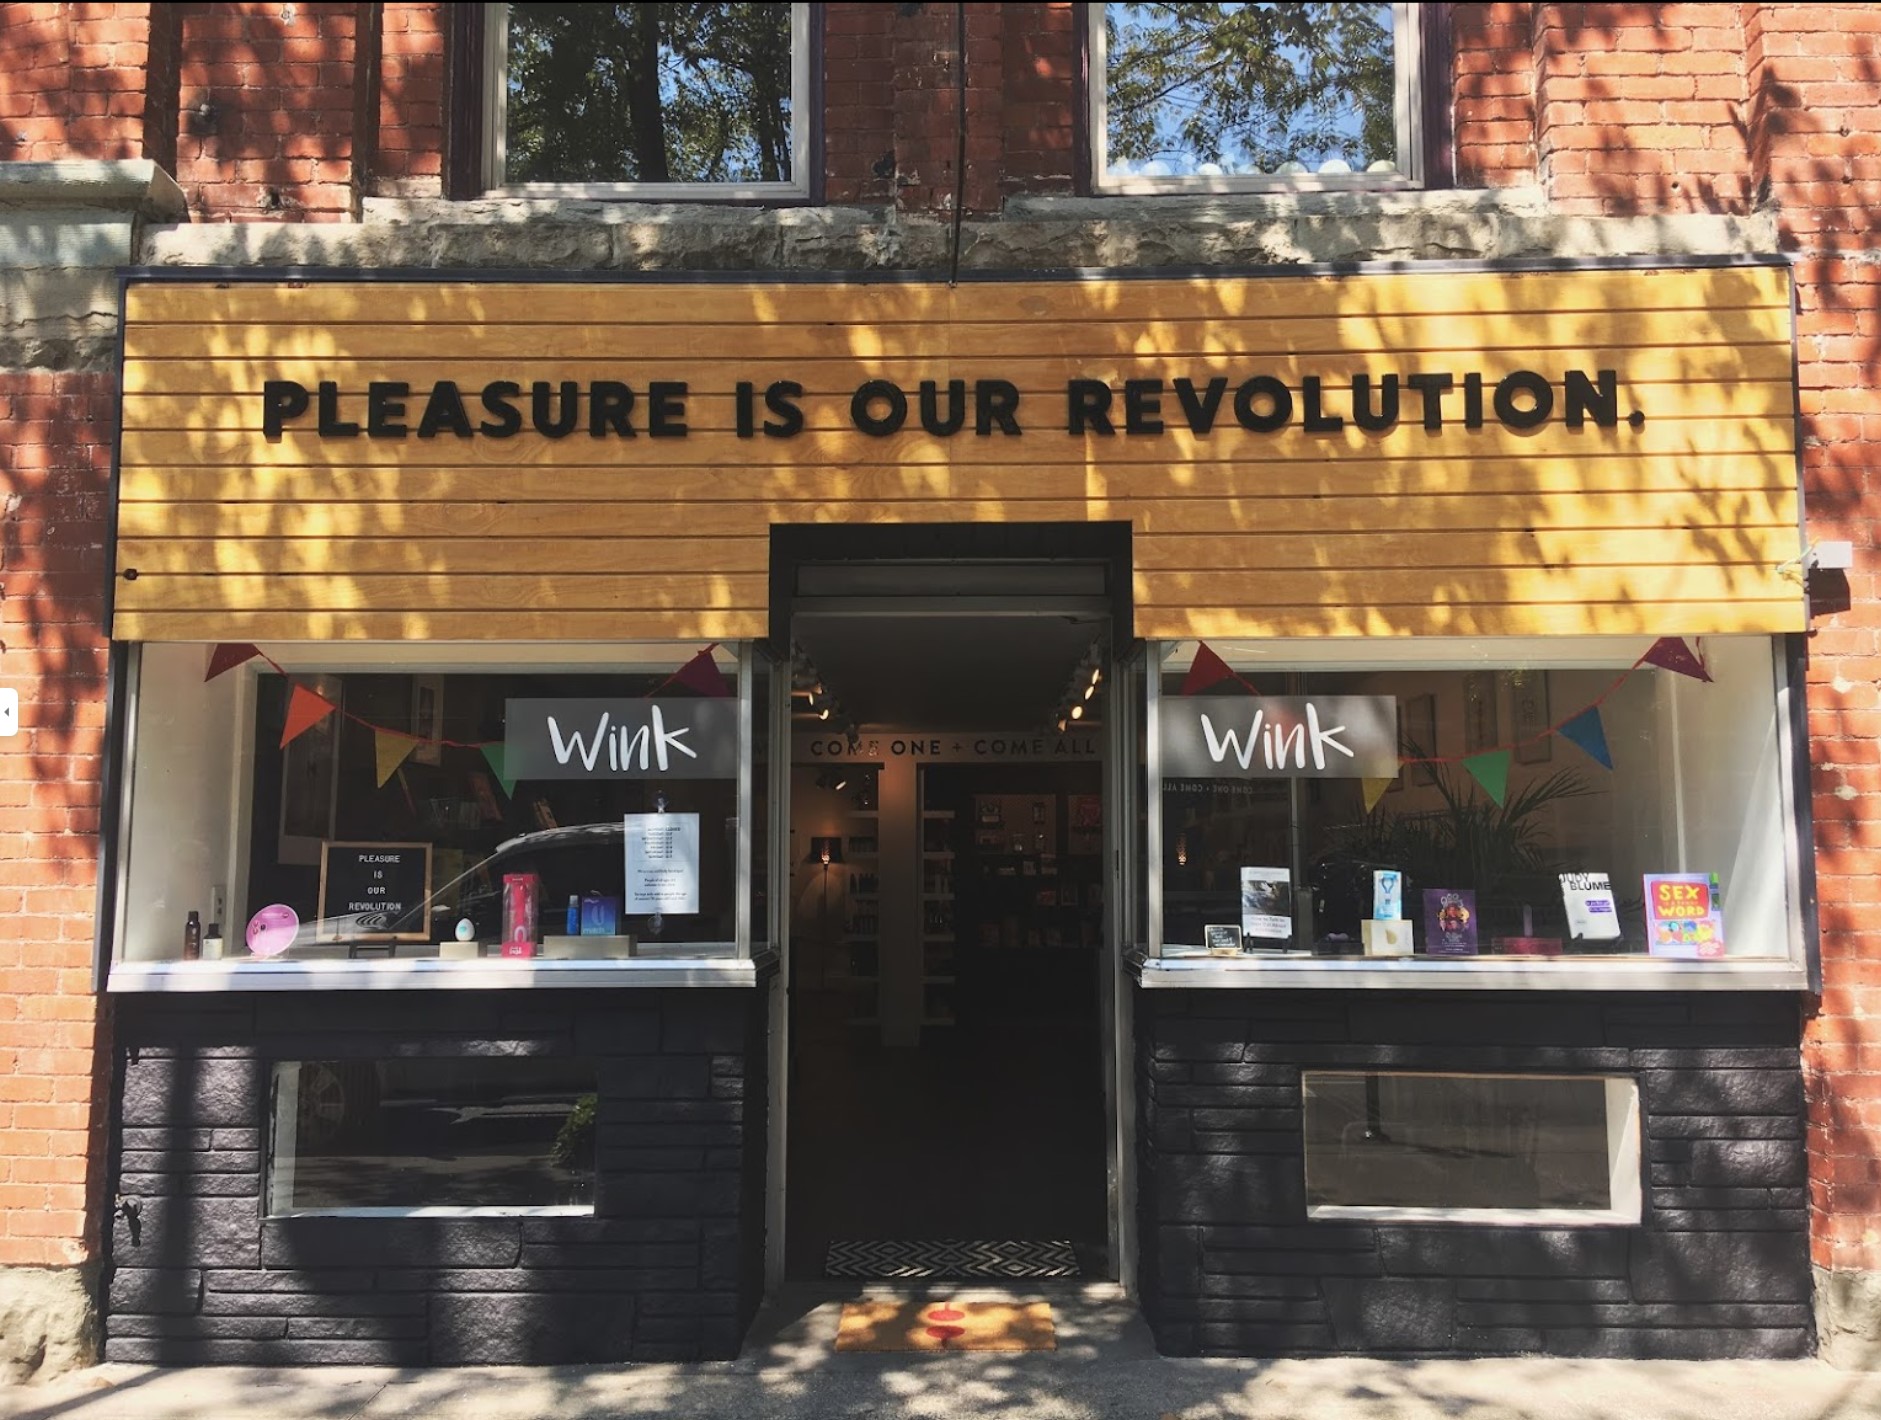 Storefront with the sign "Pleasure is our revolution" above the door and the word "wink" in windows on either side of the door.